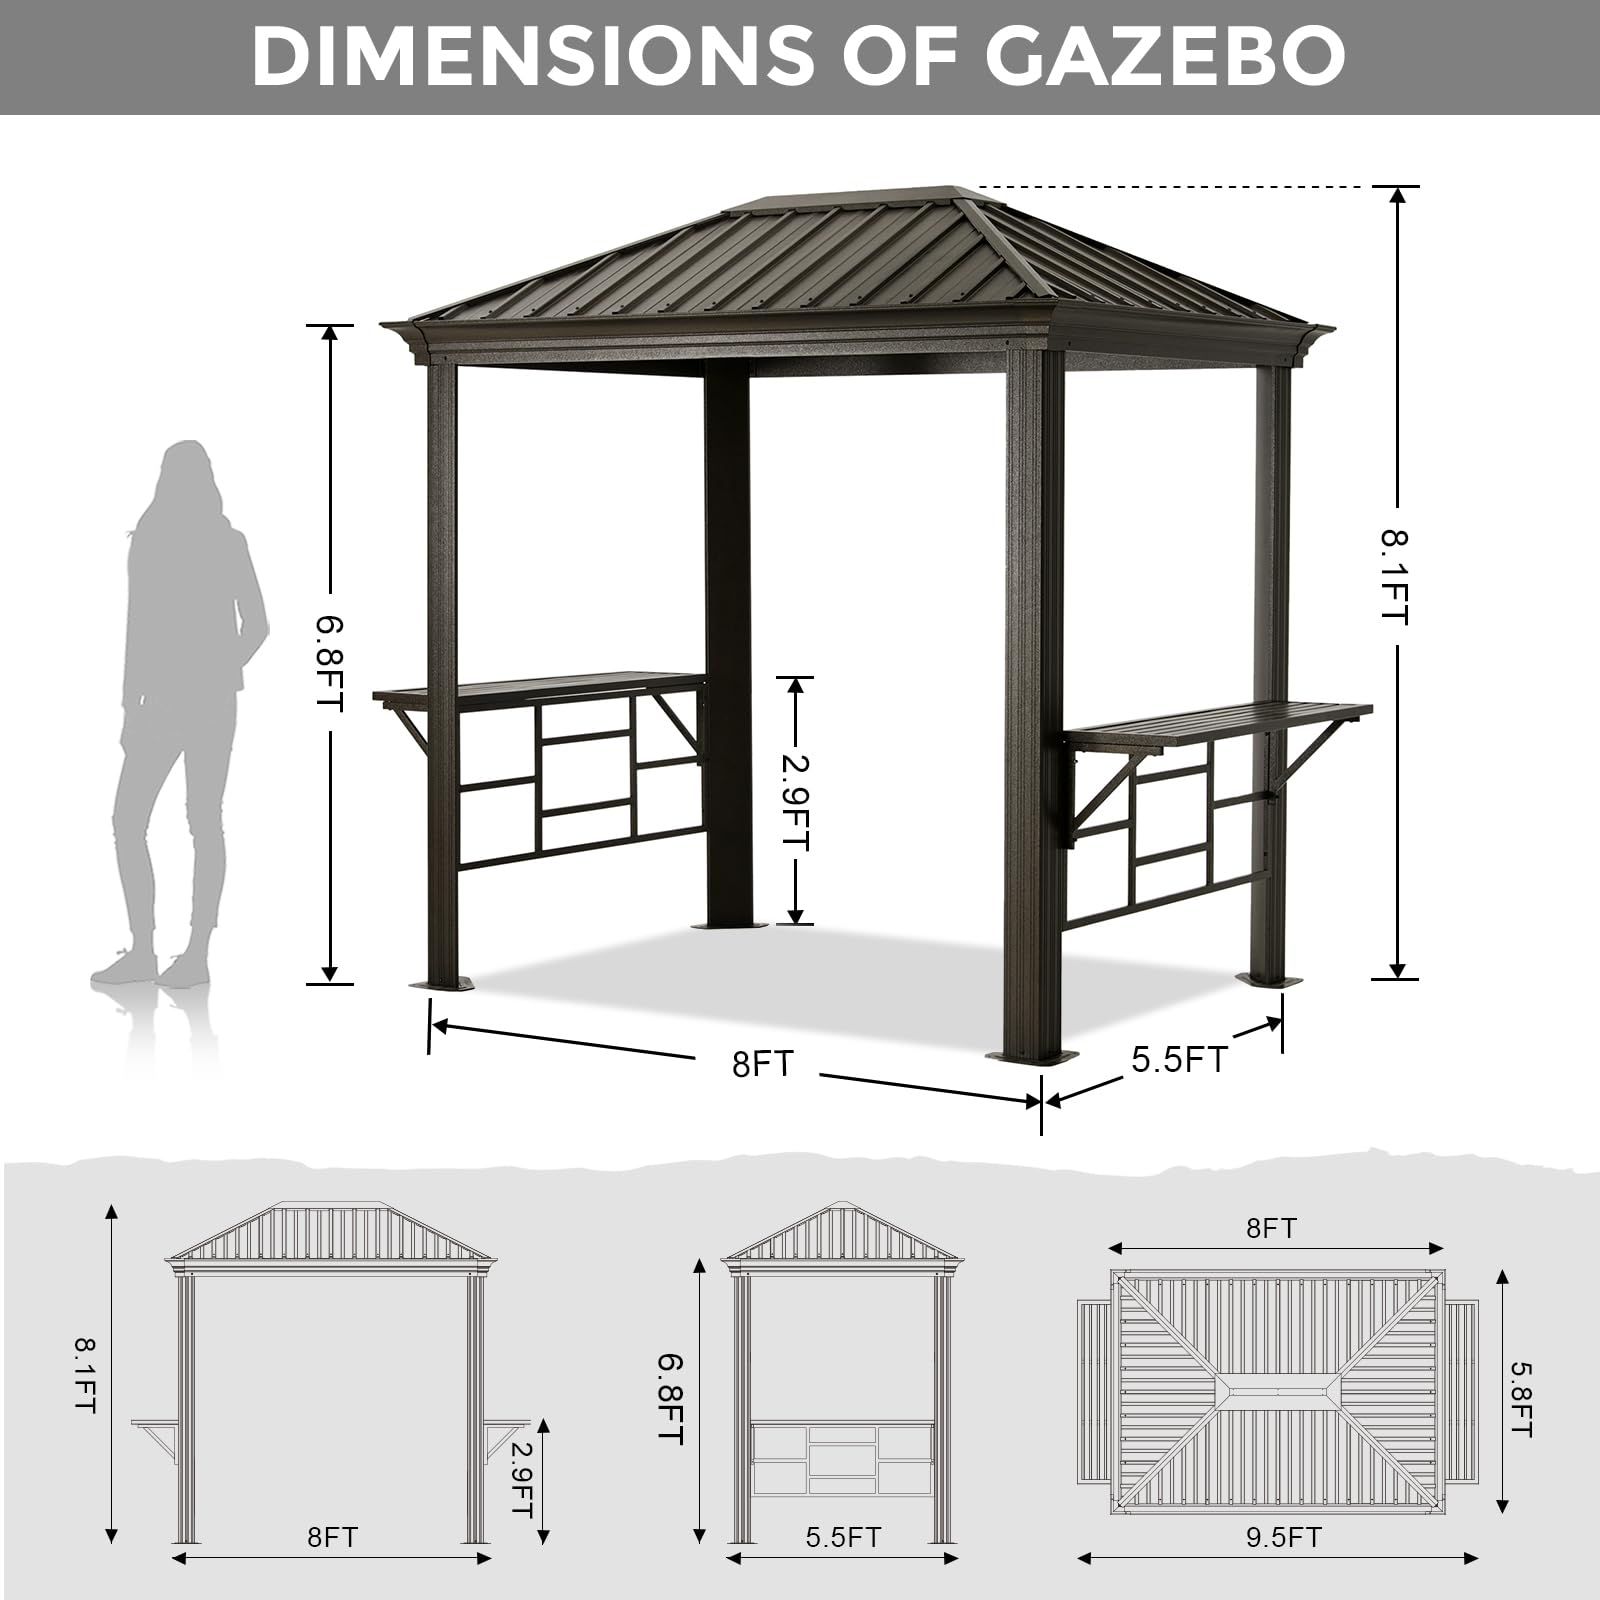 ABCCANOPY 6x8 Grill Hardtop Gazebo - Outdoor Metal Gazebo with Galvanized Steel Roof, Permanent Aluminum BBQ Canopy with Shelves for Patio, Lawn, Garden (Single Roof, Dark Brown)